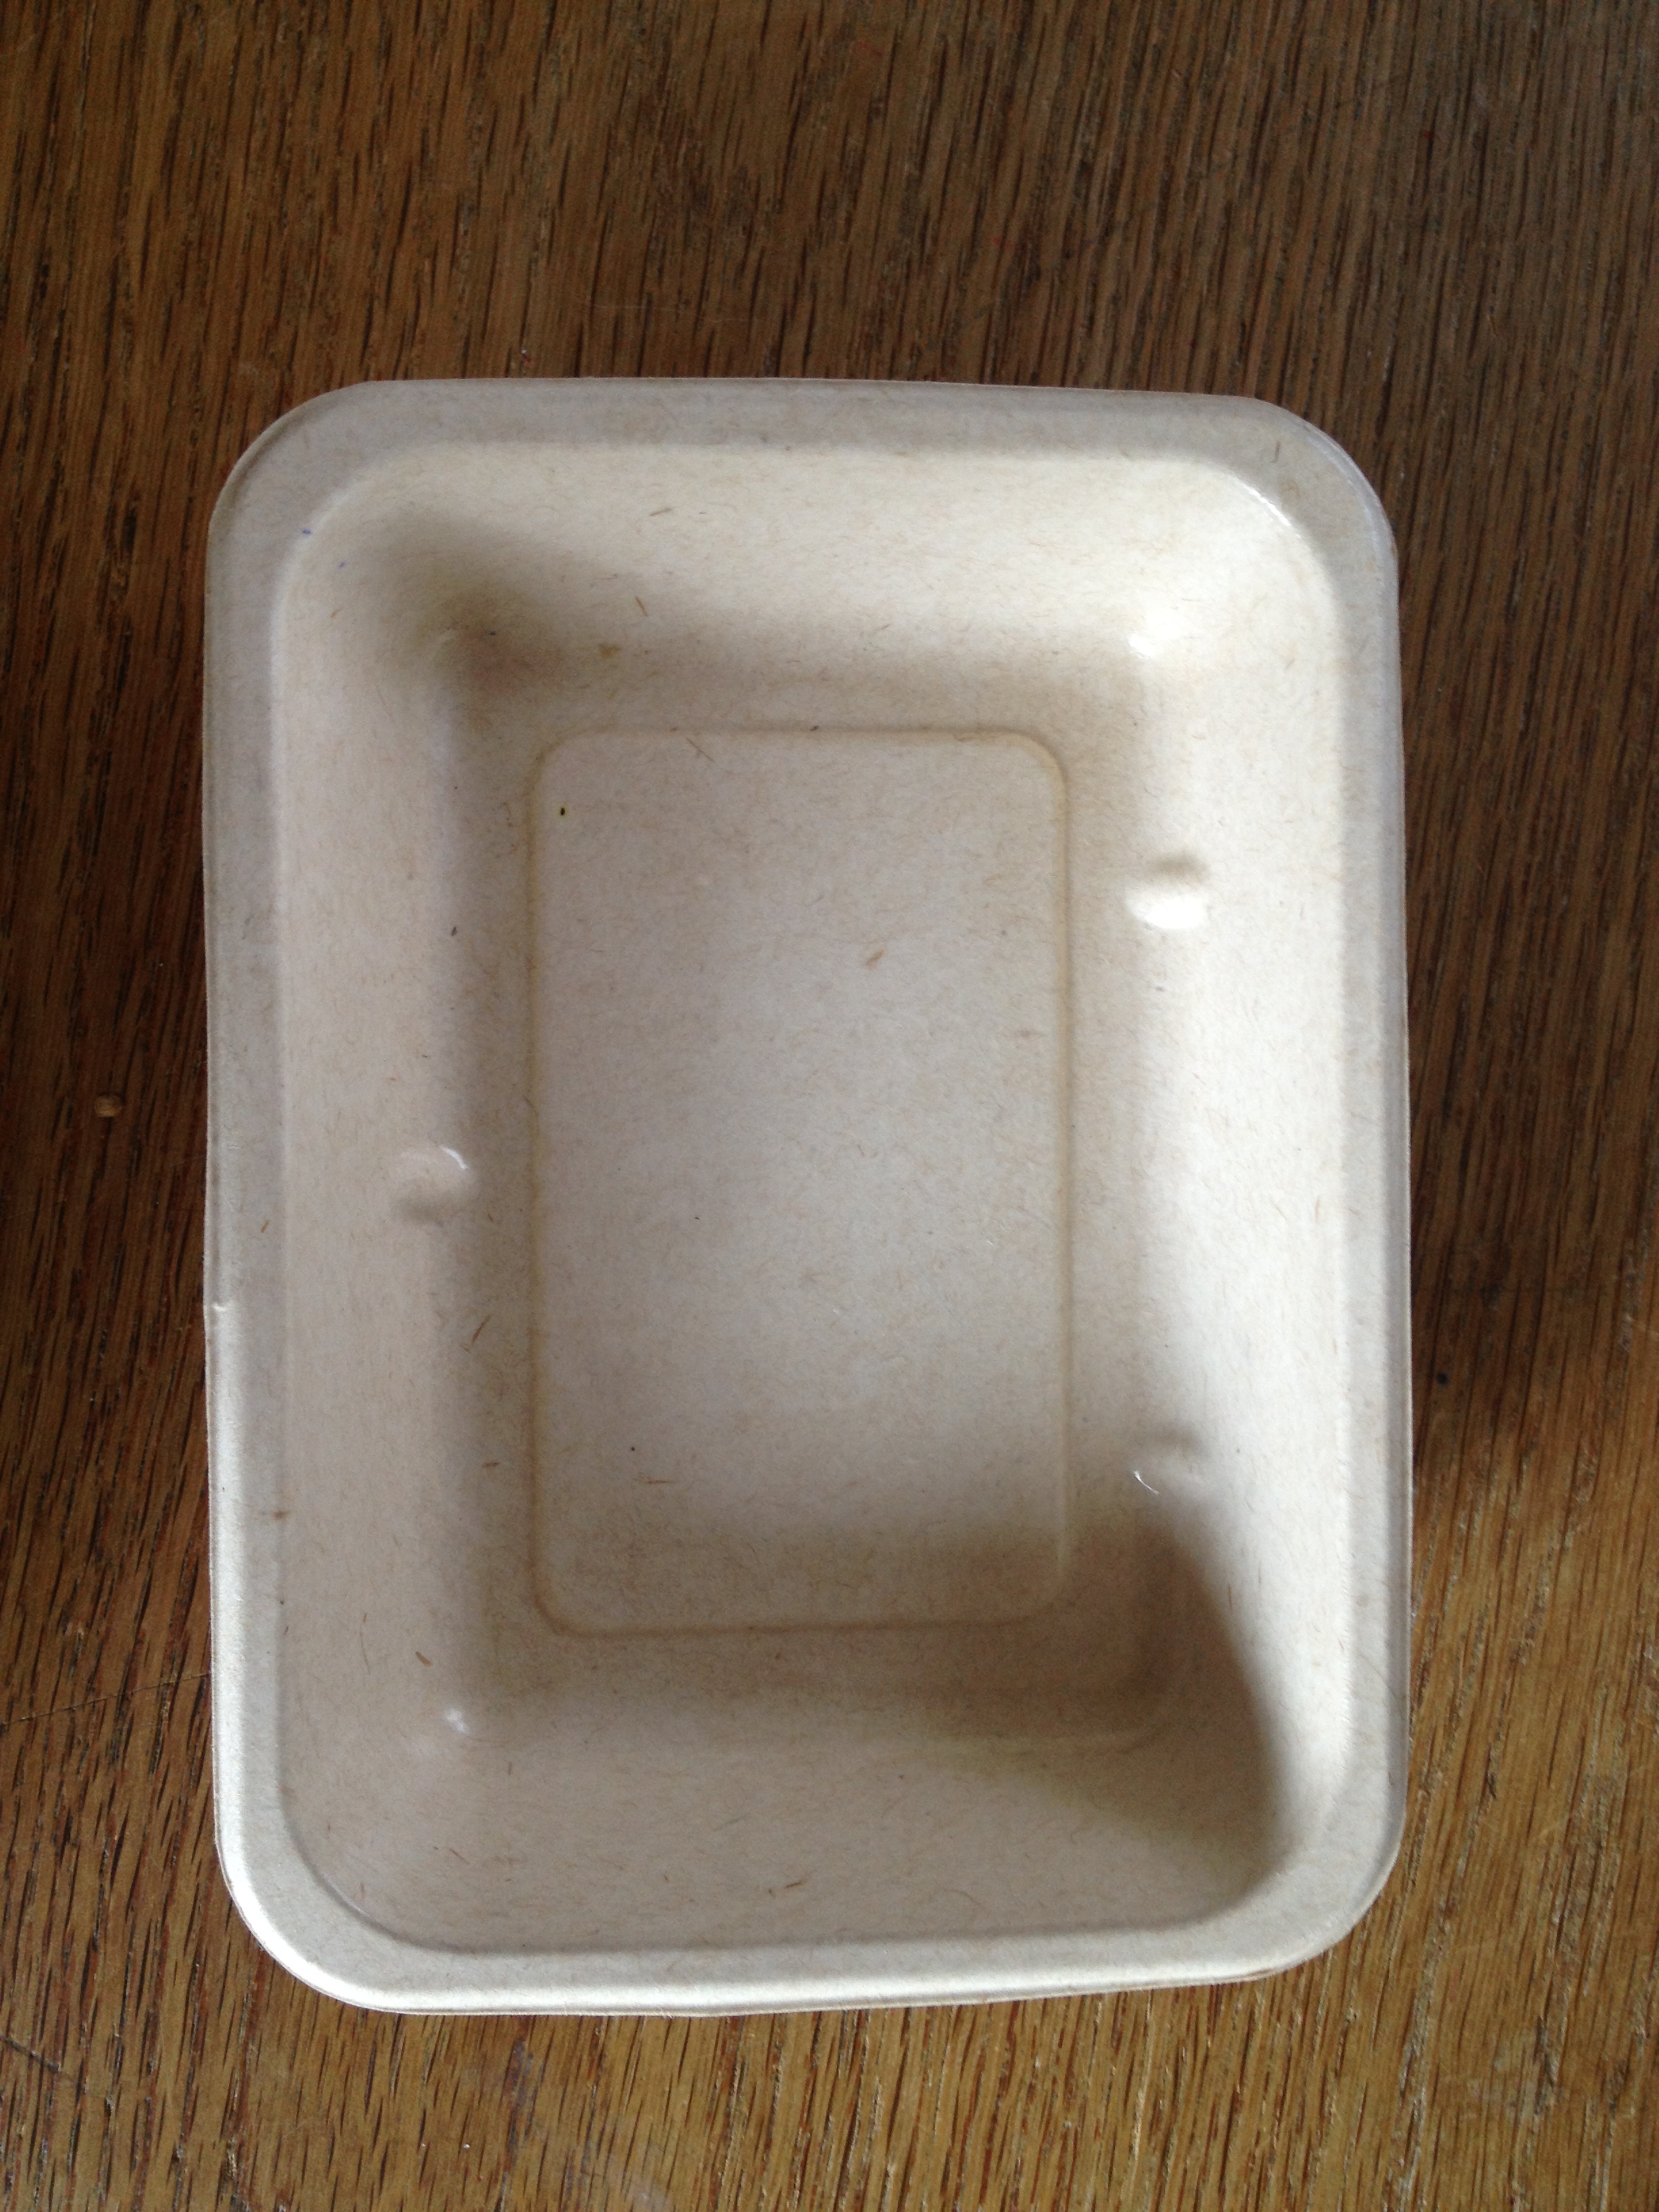 New biodegradable tray offers reduced impact